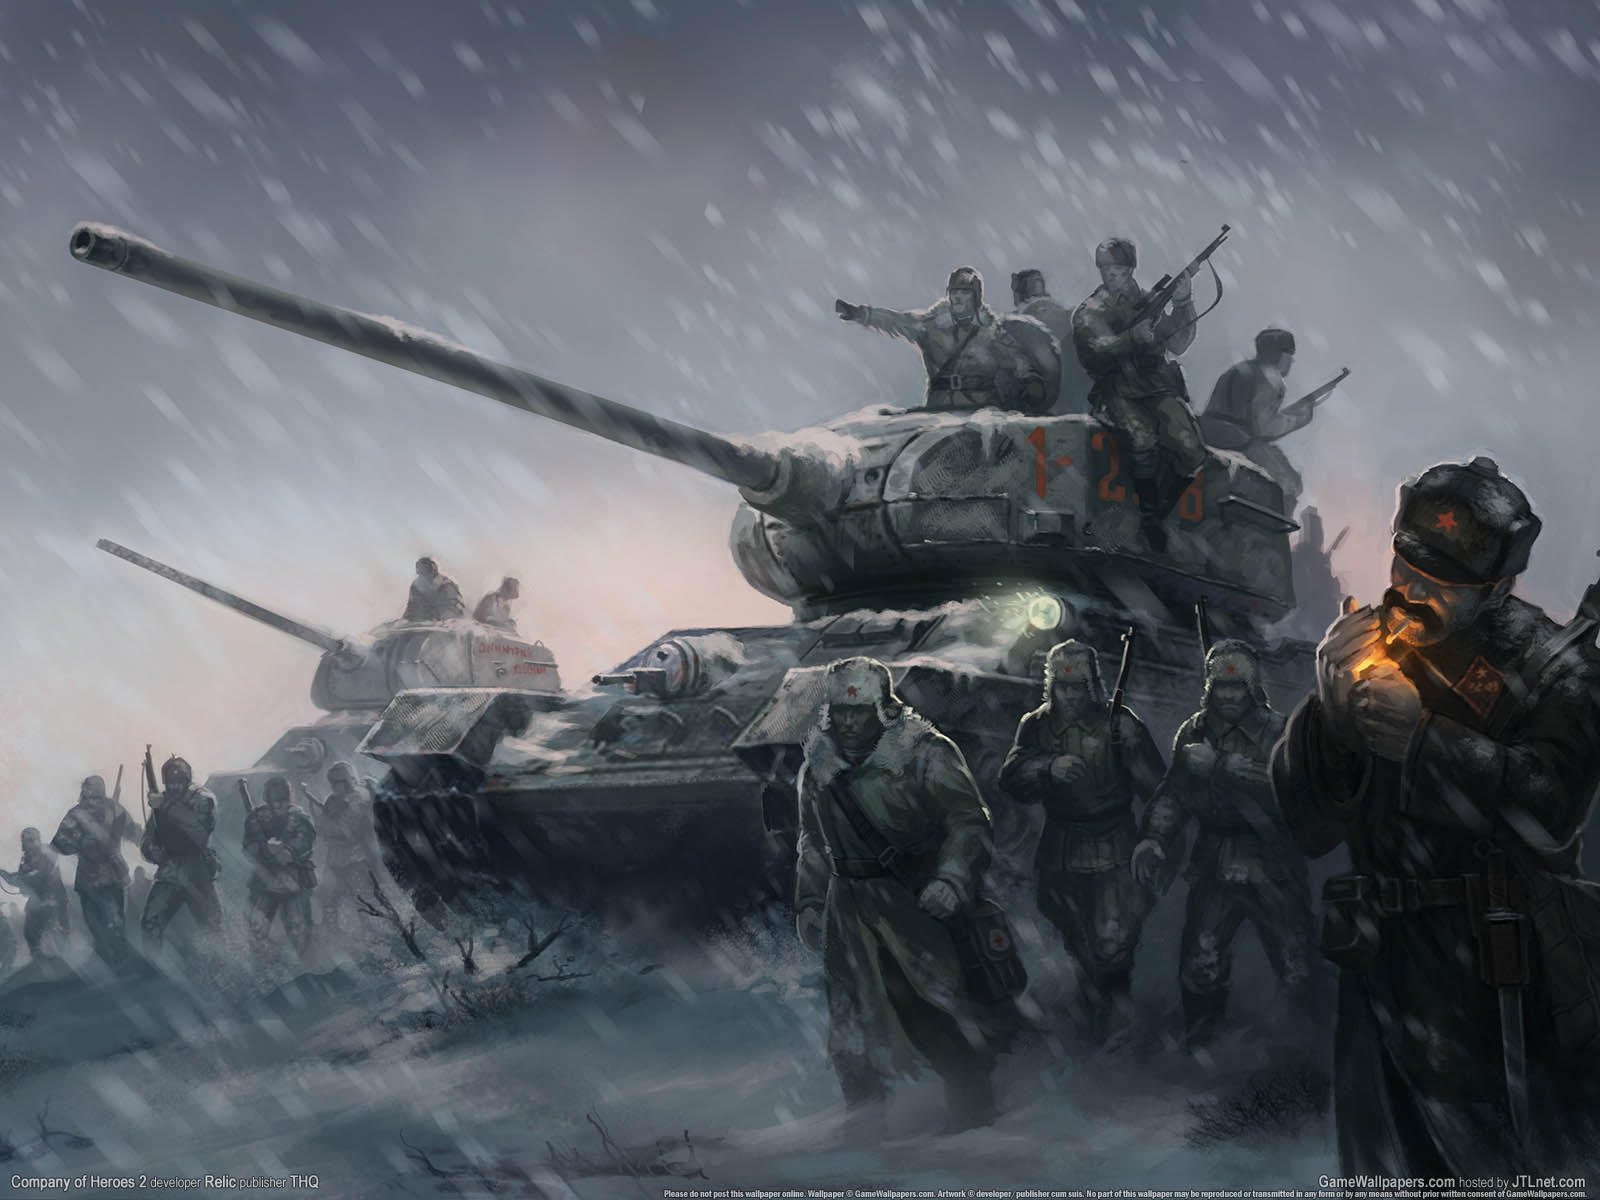 Company of Heroes 2 for 1600 x 1200 resolution